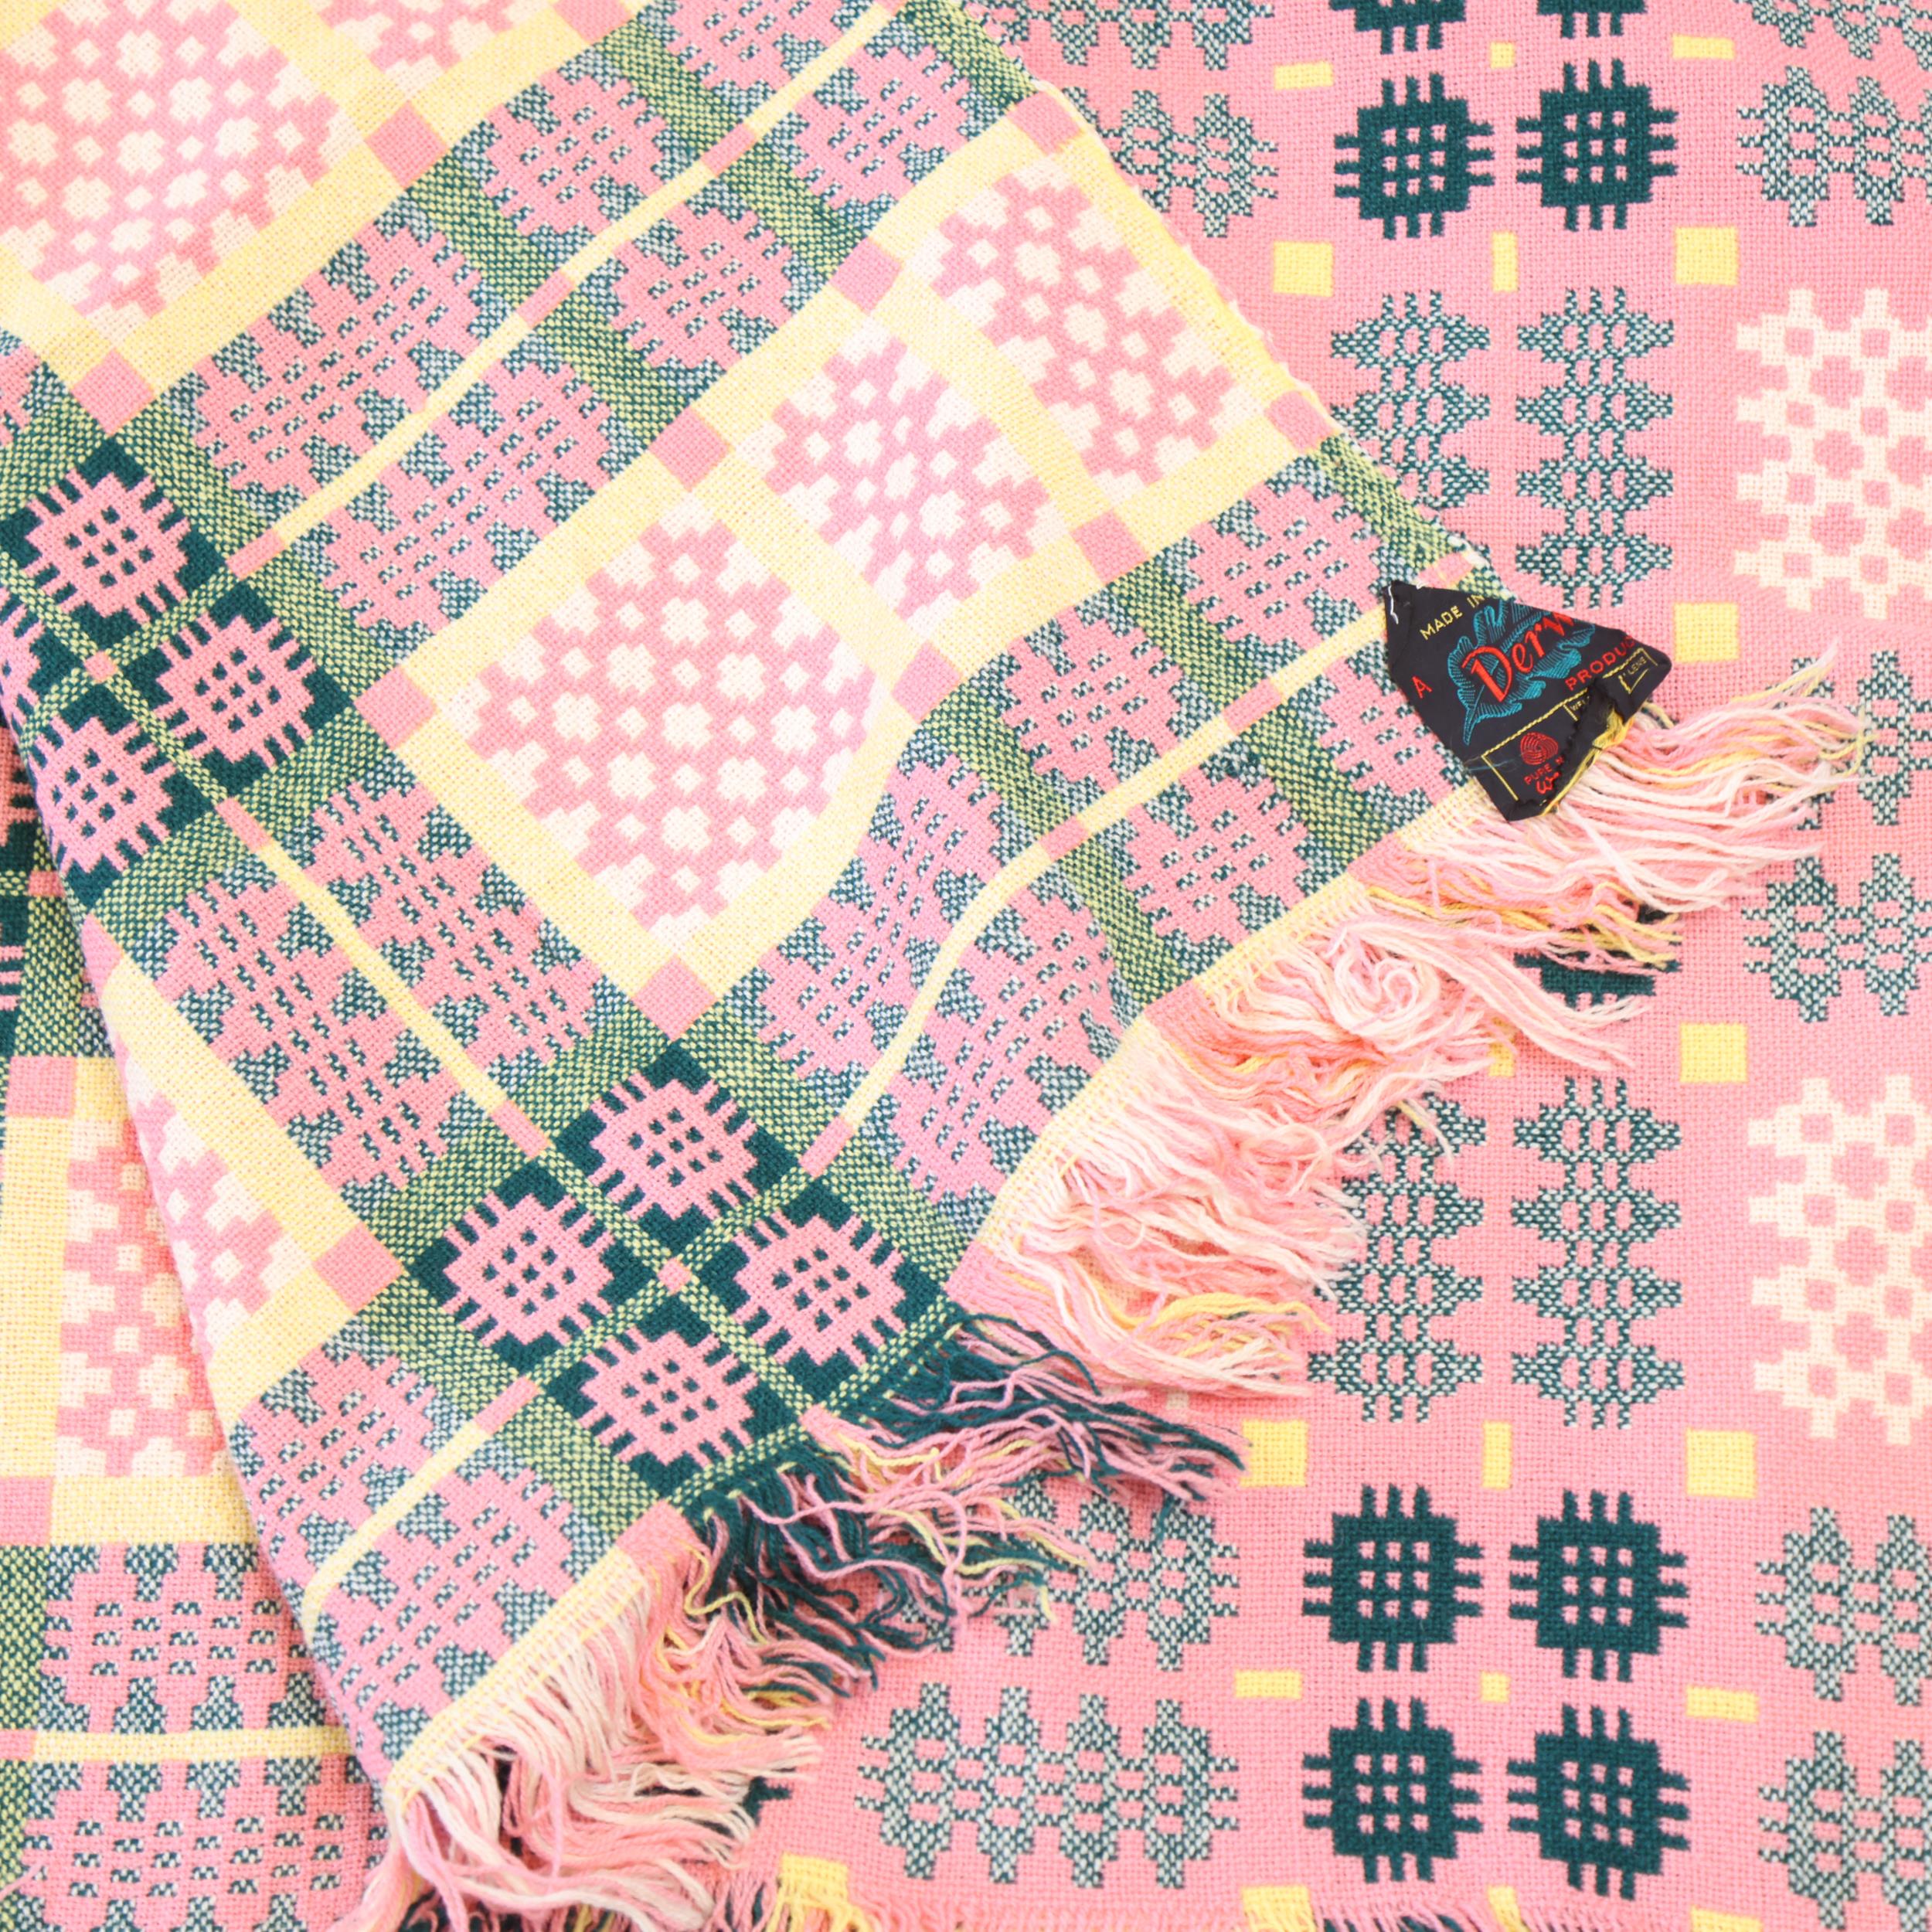 A Welsh Blanket, reversible in pink/yellow/green wool, makers label for Drew Product, 240 x 160cm - Image 2 of 3